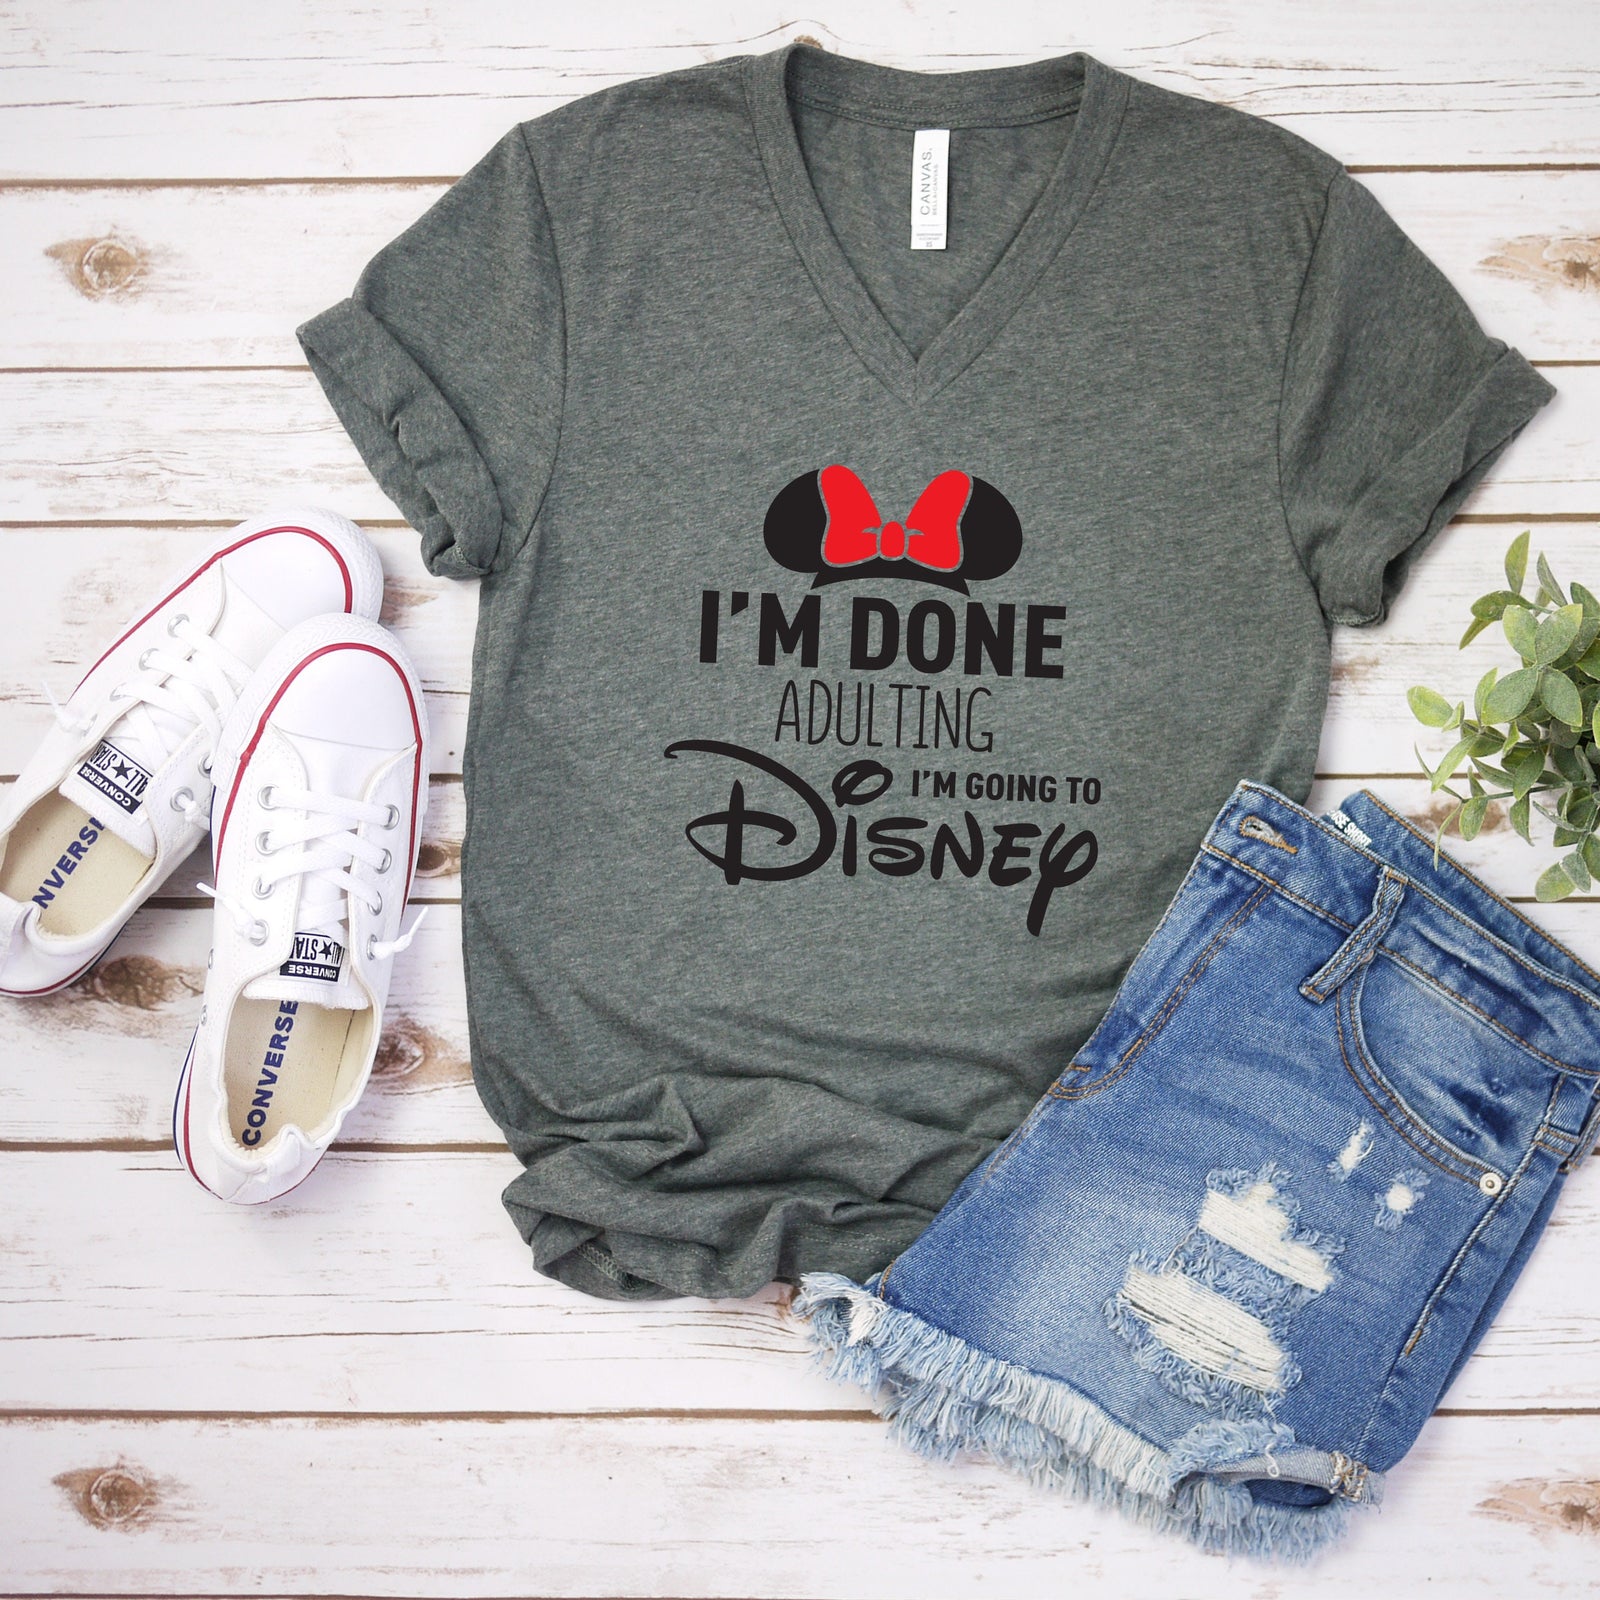 I'm Done Adulting I'm Going to Disney T Shirt - Disney Trip Matching Shirts - Disney Family - Minnie Mouse